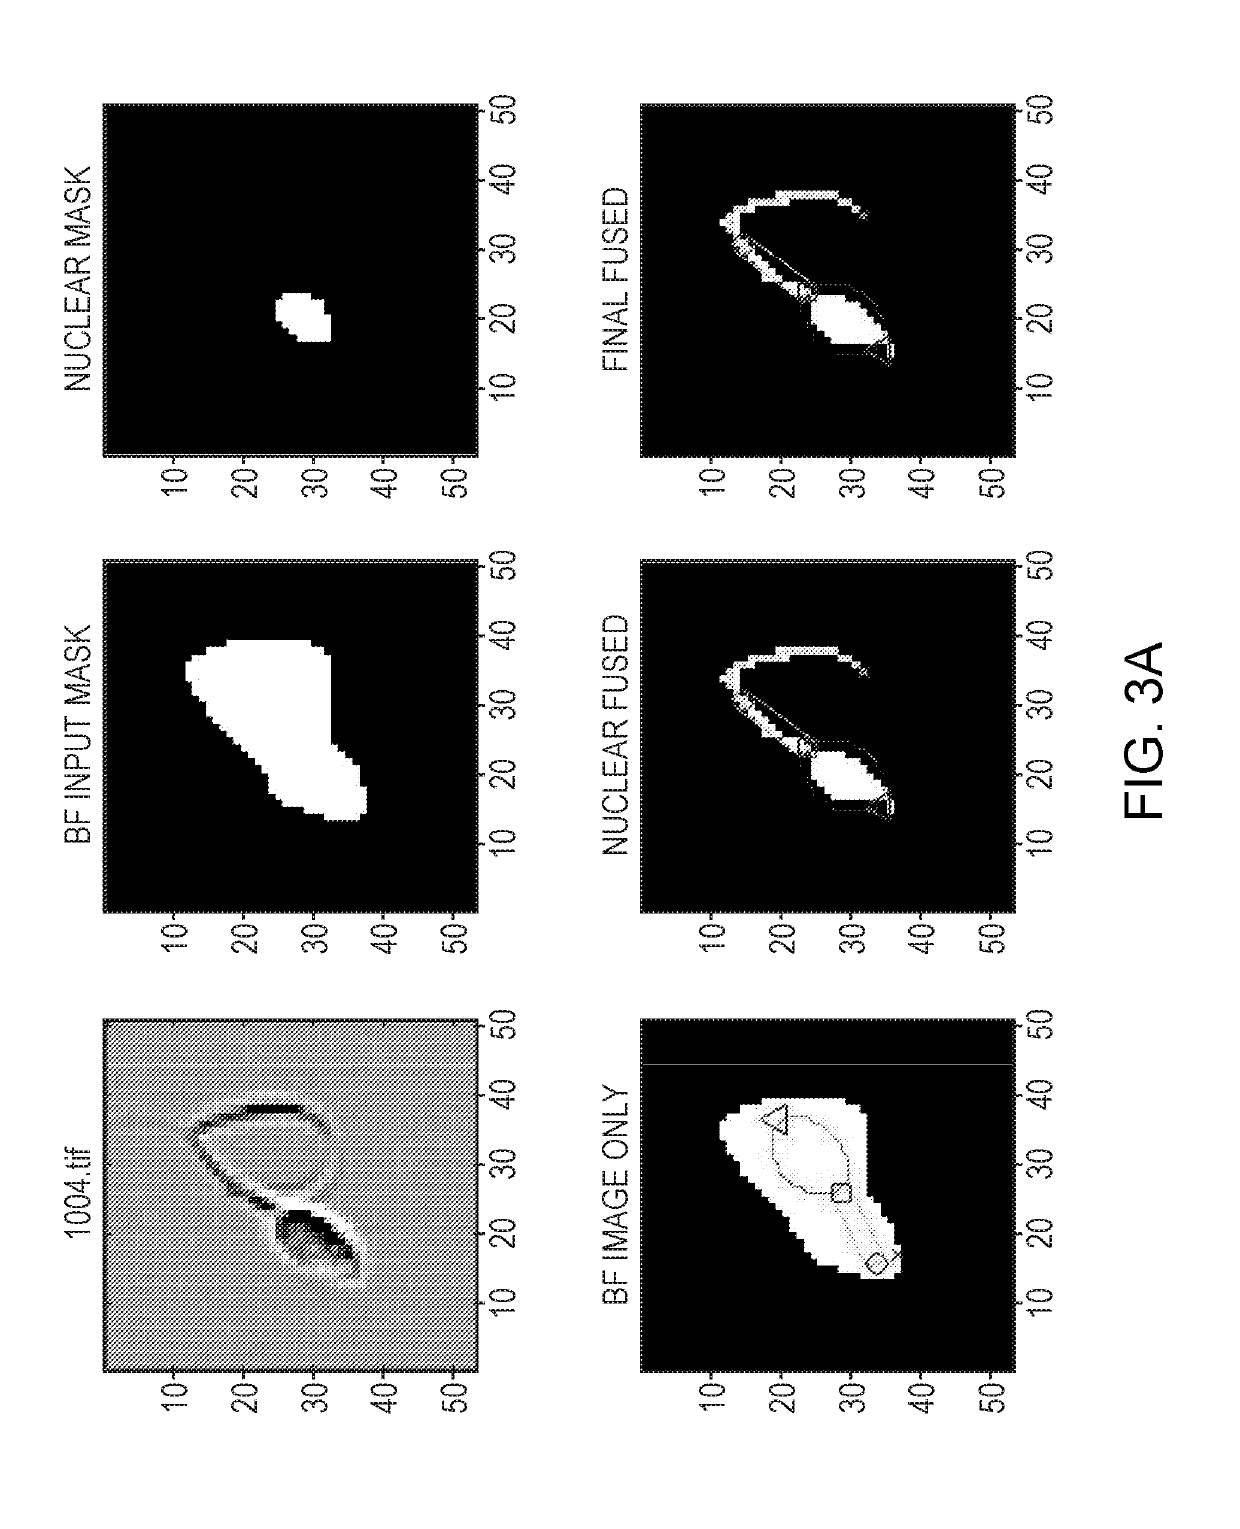 A Method To Combine Brightfield And Fluorescent Channels For Cell Image Segmentation And Morphological Analysis Using Images Obtained From Imaging Flow Cytometer (IFC)